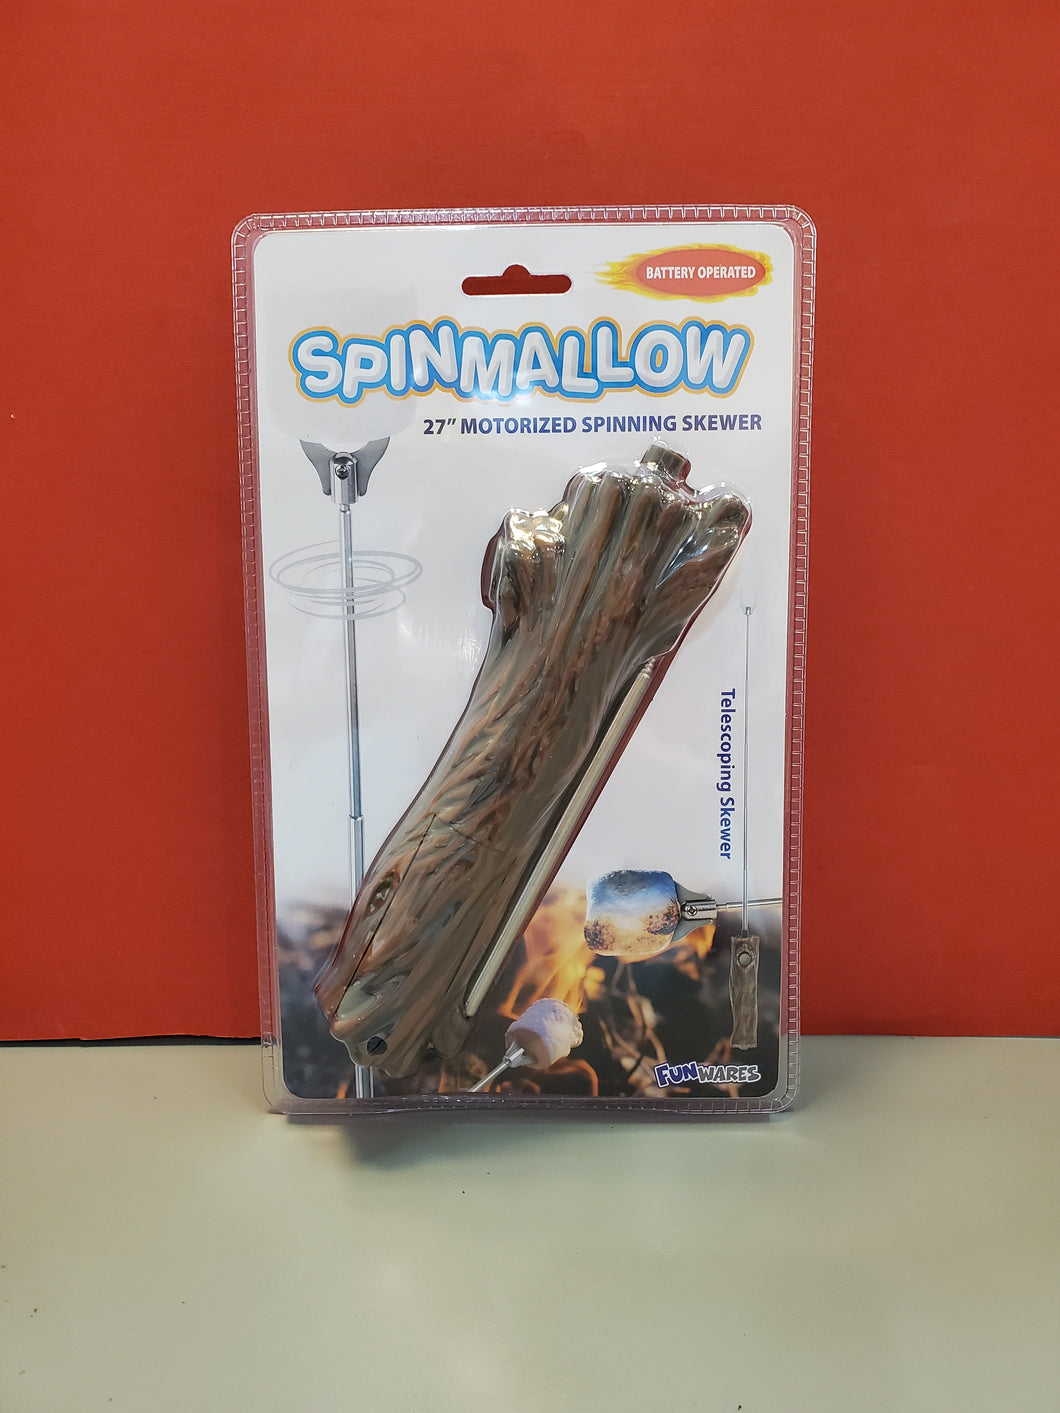 Spinmallow - battery powered spinning skewer